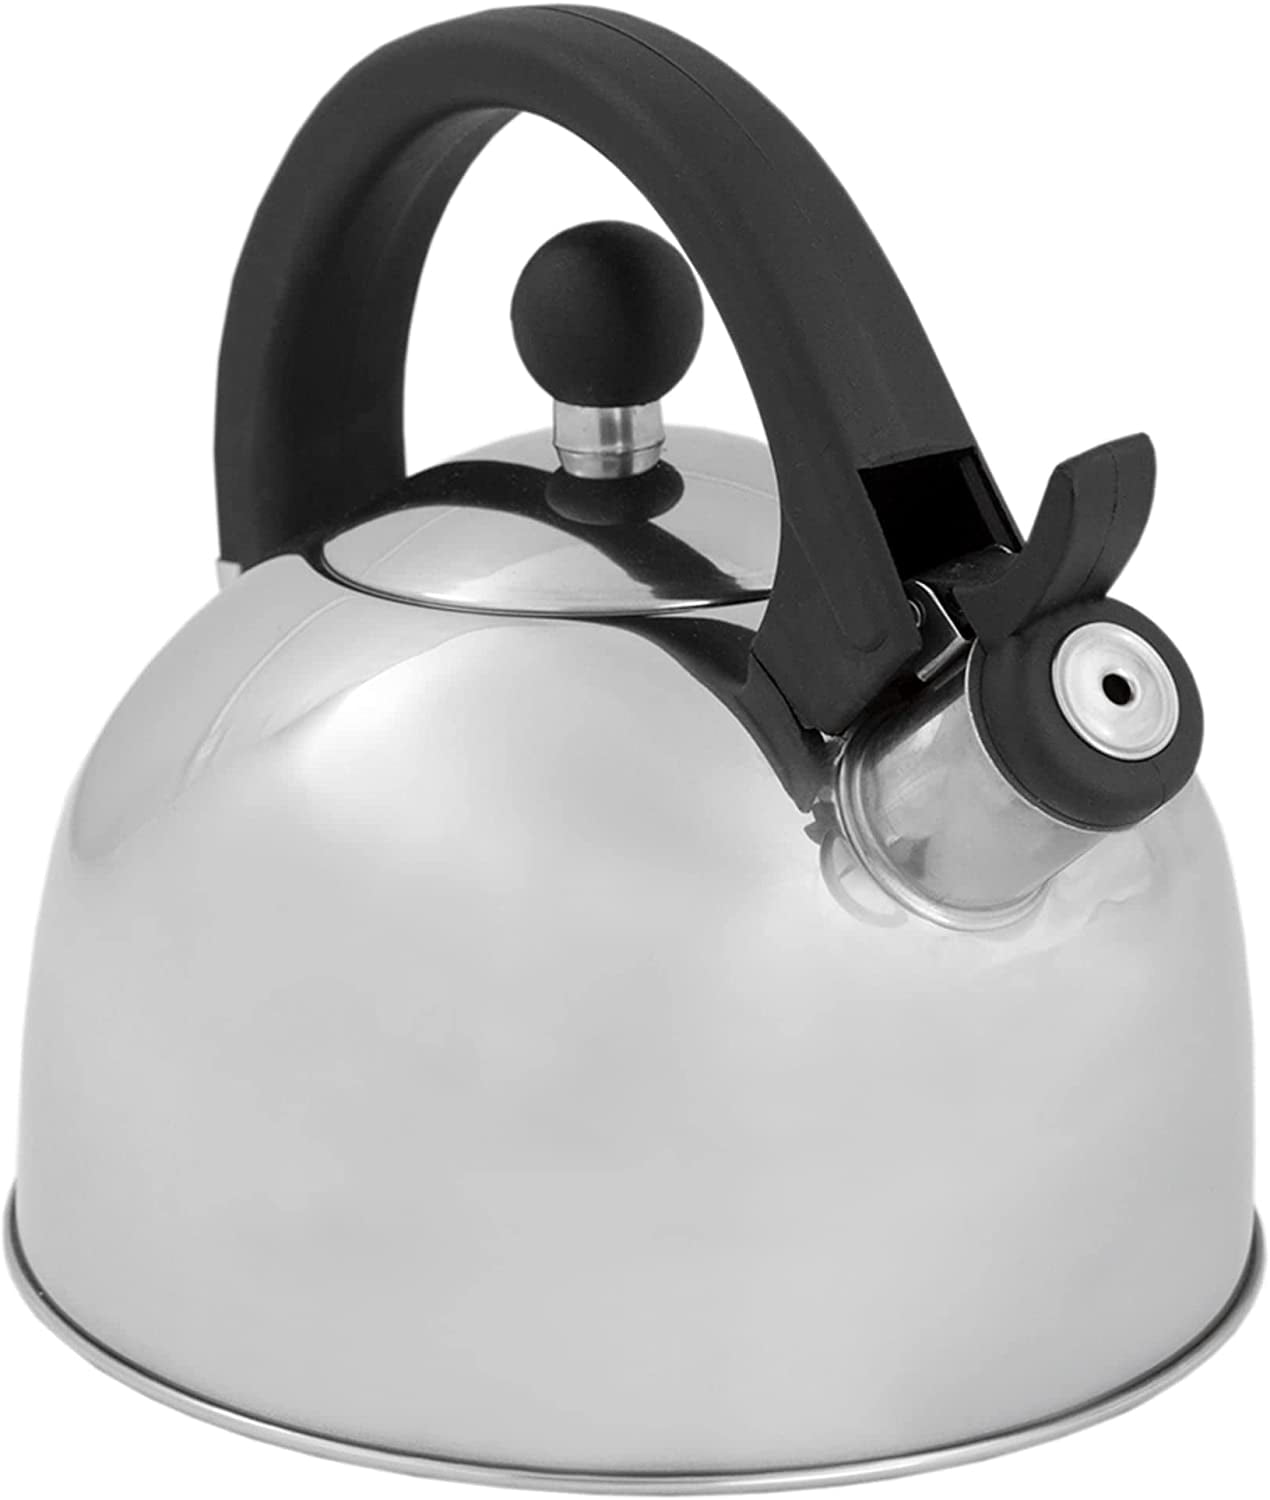 FISSMAN Whistling Kettle For Gas Stoves 3L Thick Stainless Steel Water  Kettle Teapots to Boil WaterKitchen Drinkware